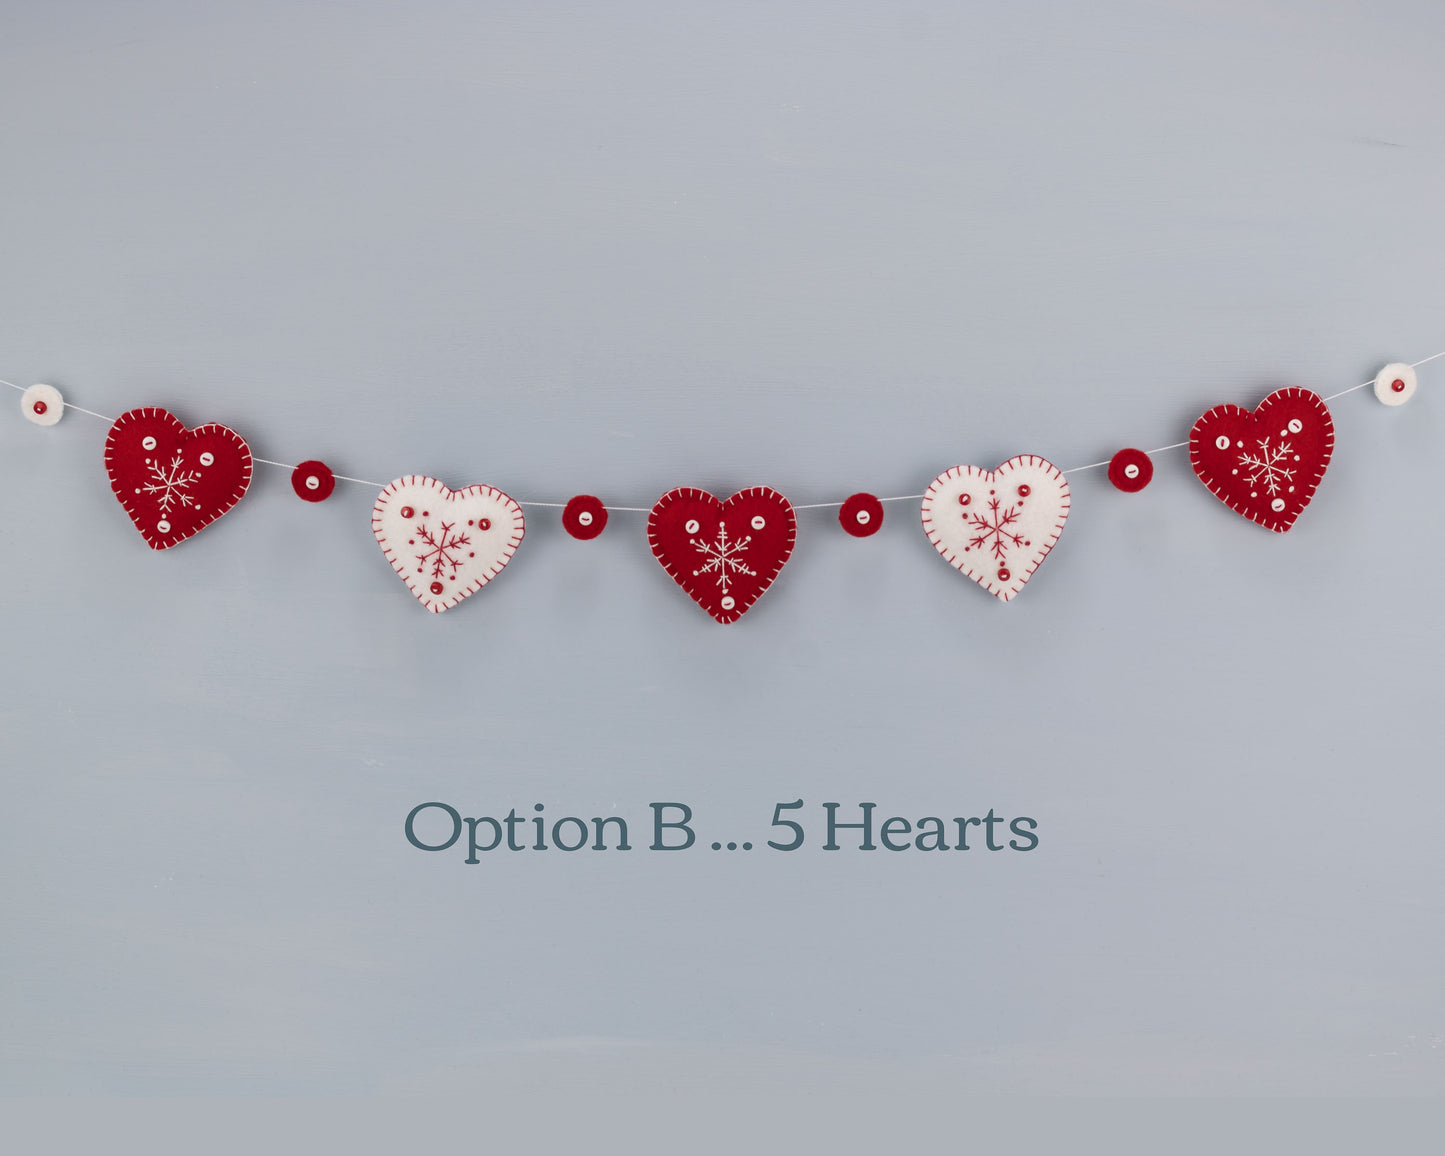 Snowflake Heart Felt Garland, Red and White